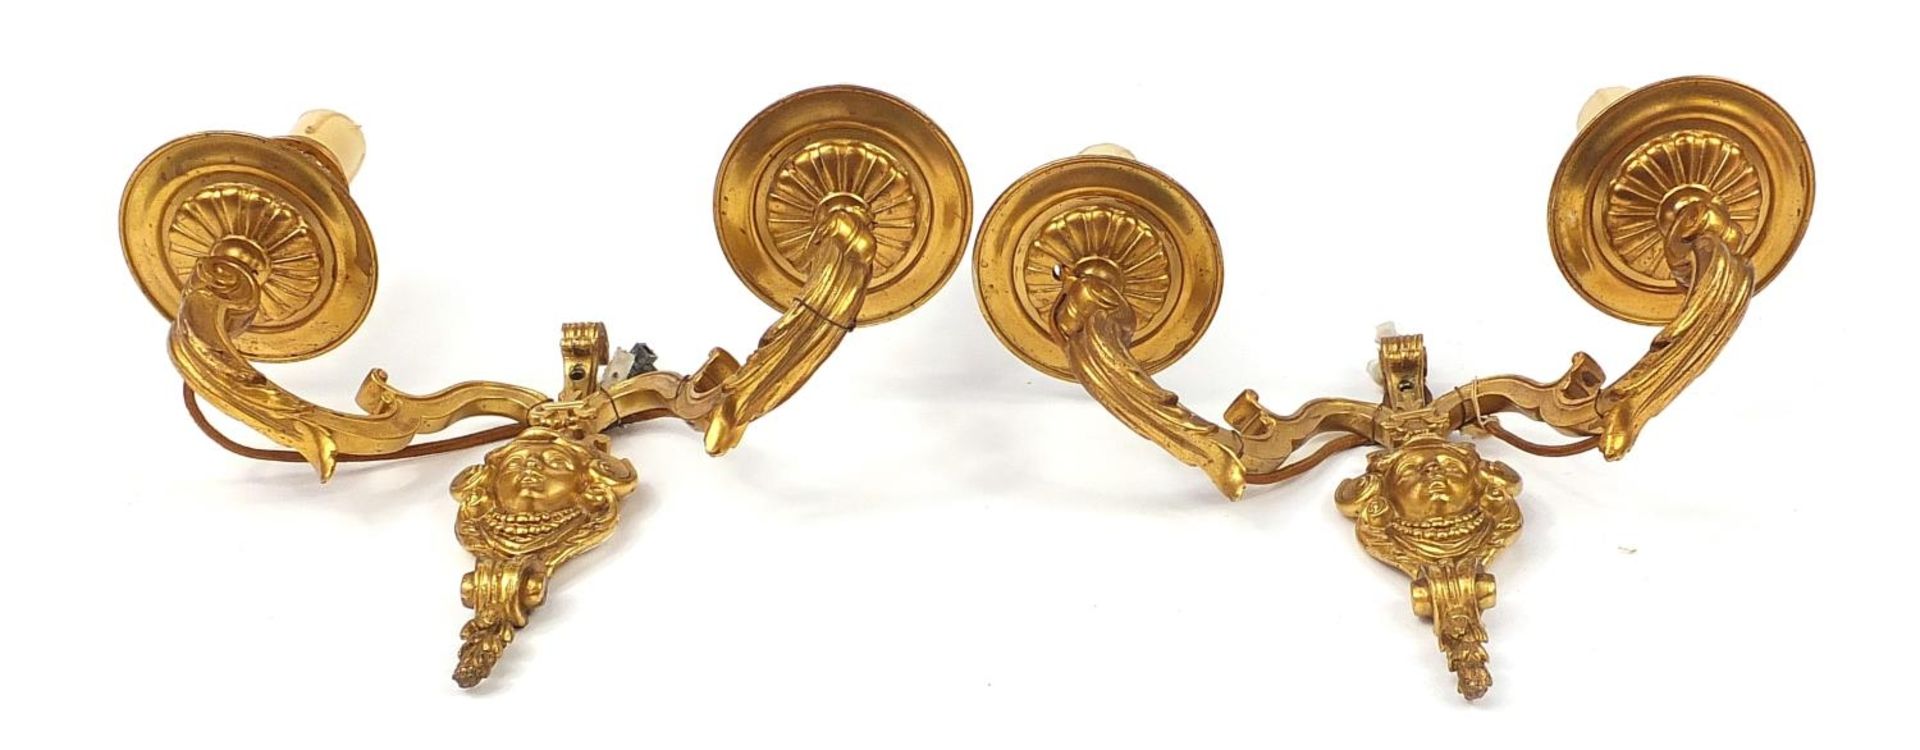 Pair of French style two branch gilt metal wall sconces with masks, 29cm high x 29cm wide - Image 4 of 4